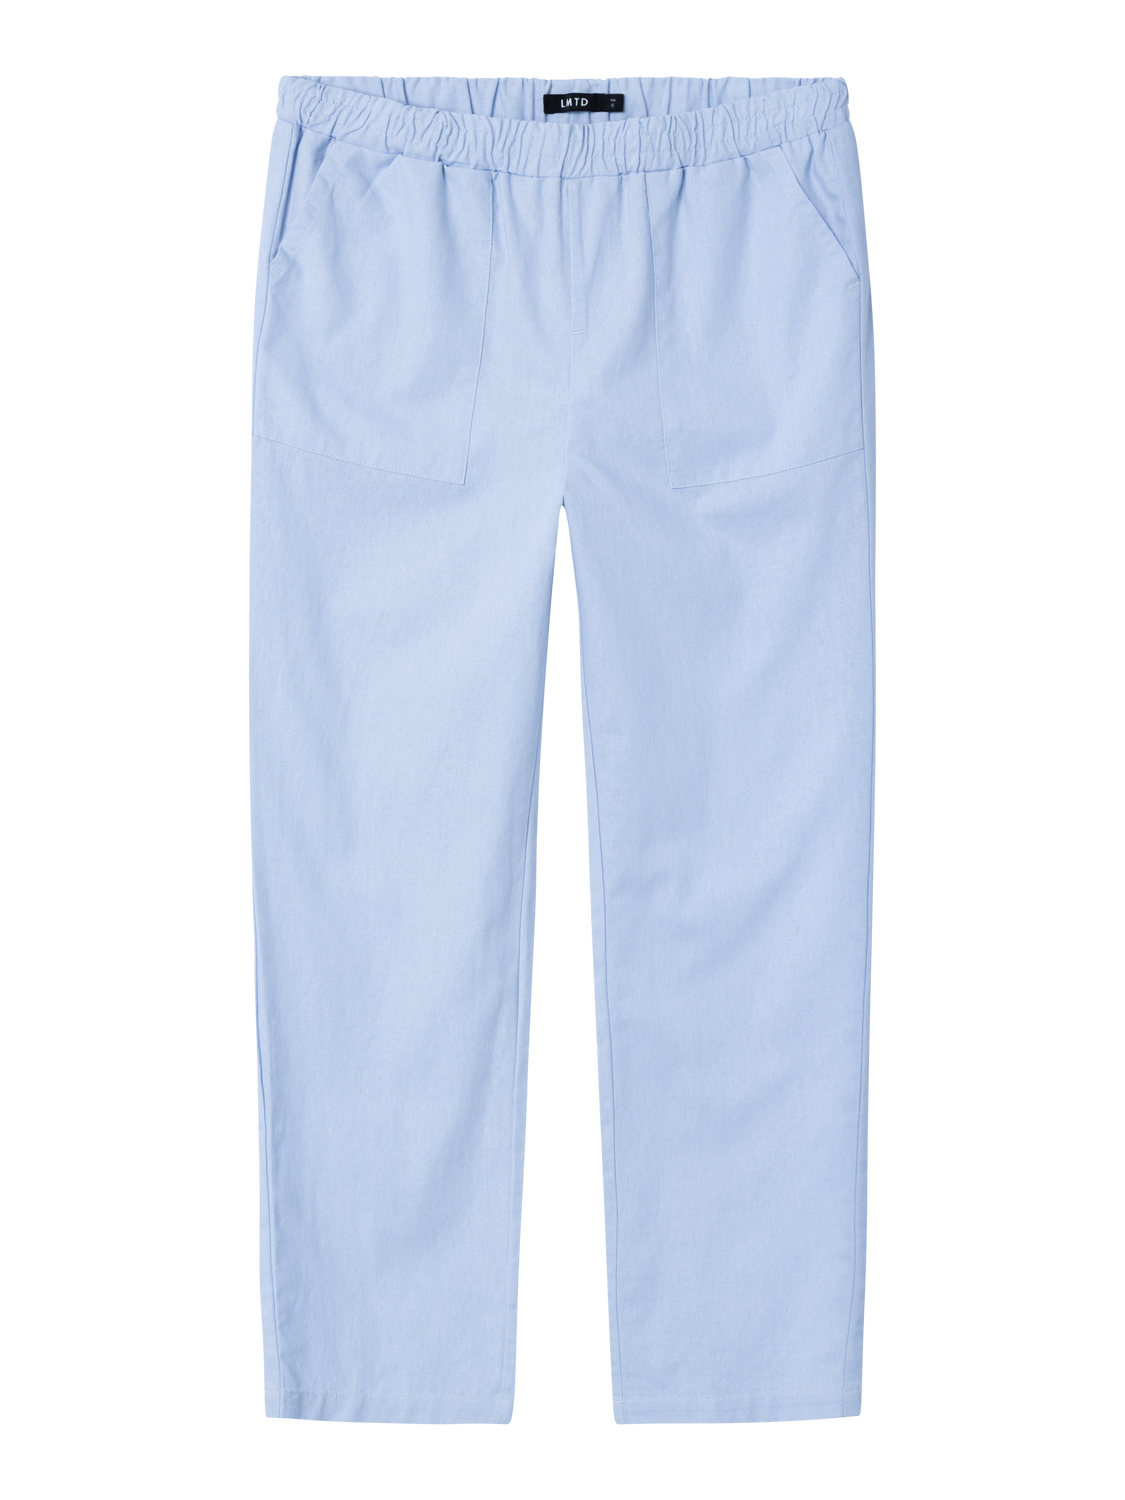 NLFHILL Trousers - Heather